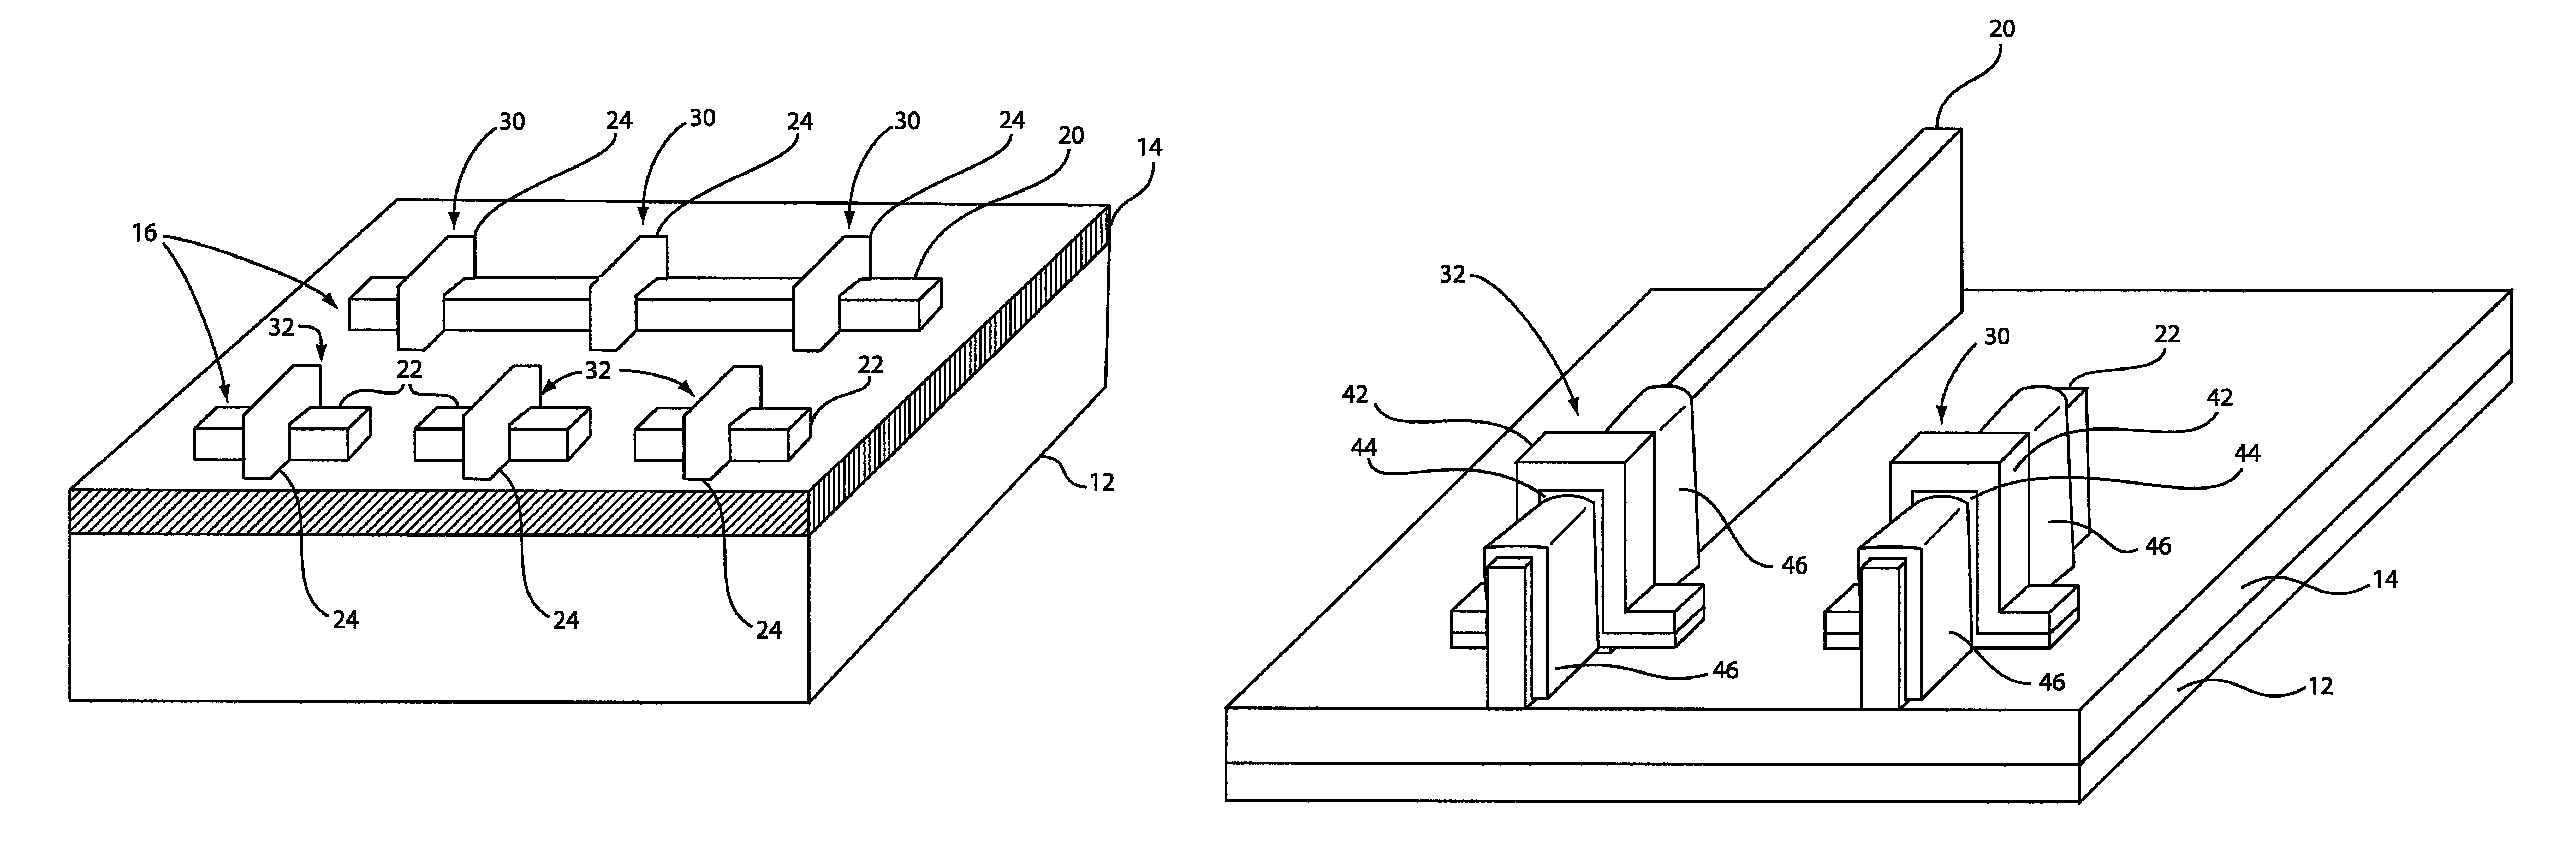 Strained CMOS device, circuit and method of fabrication